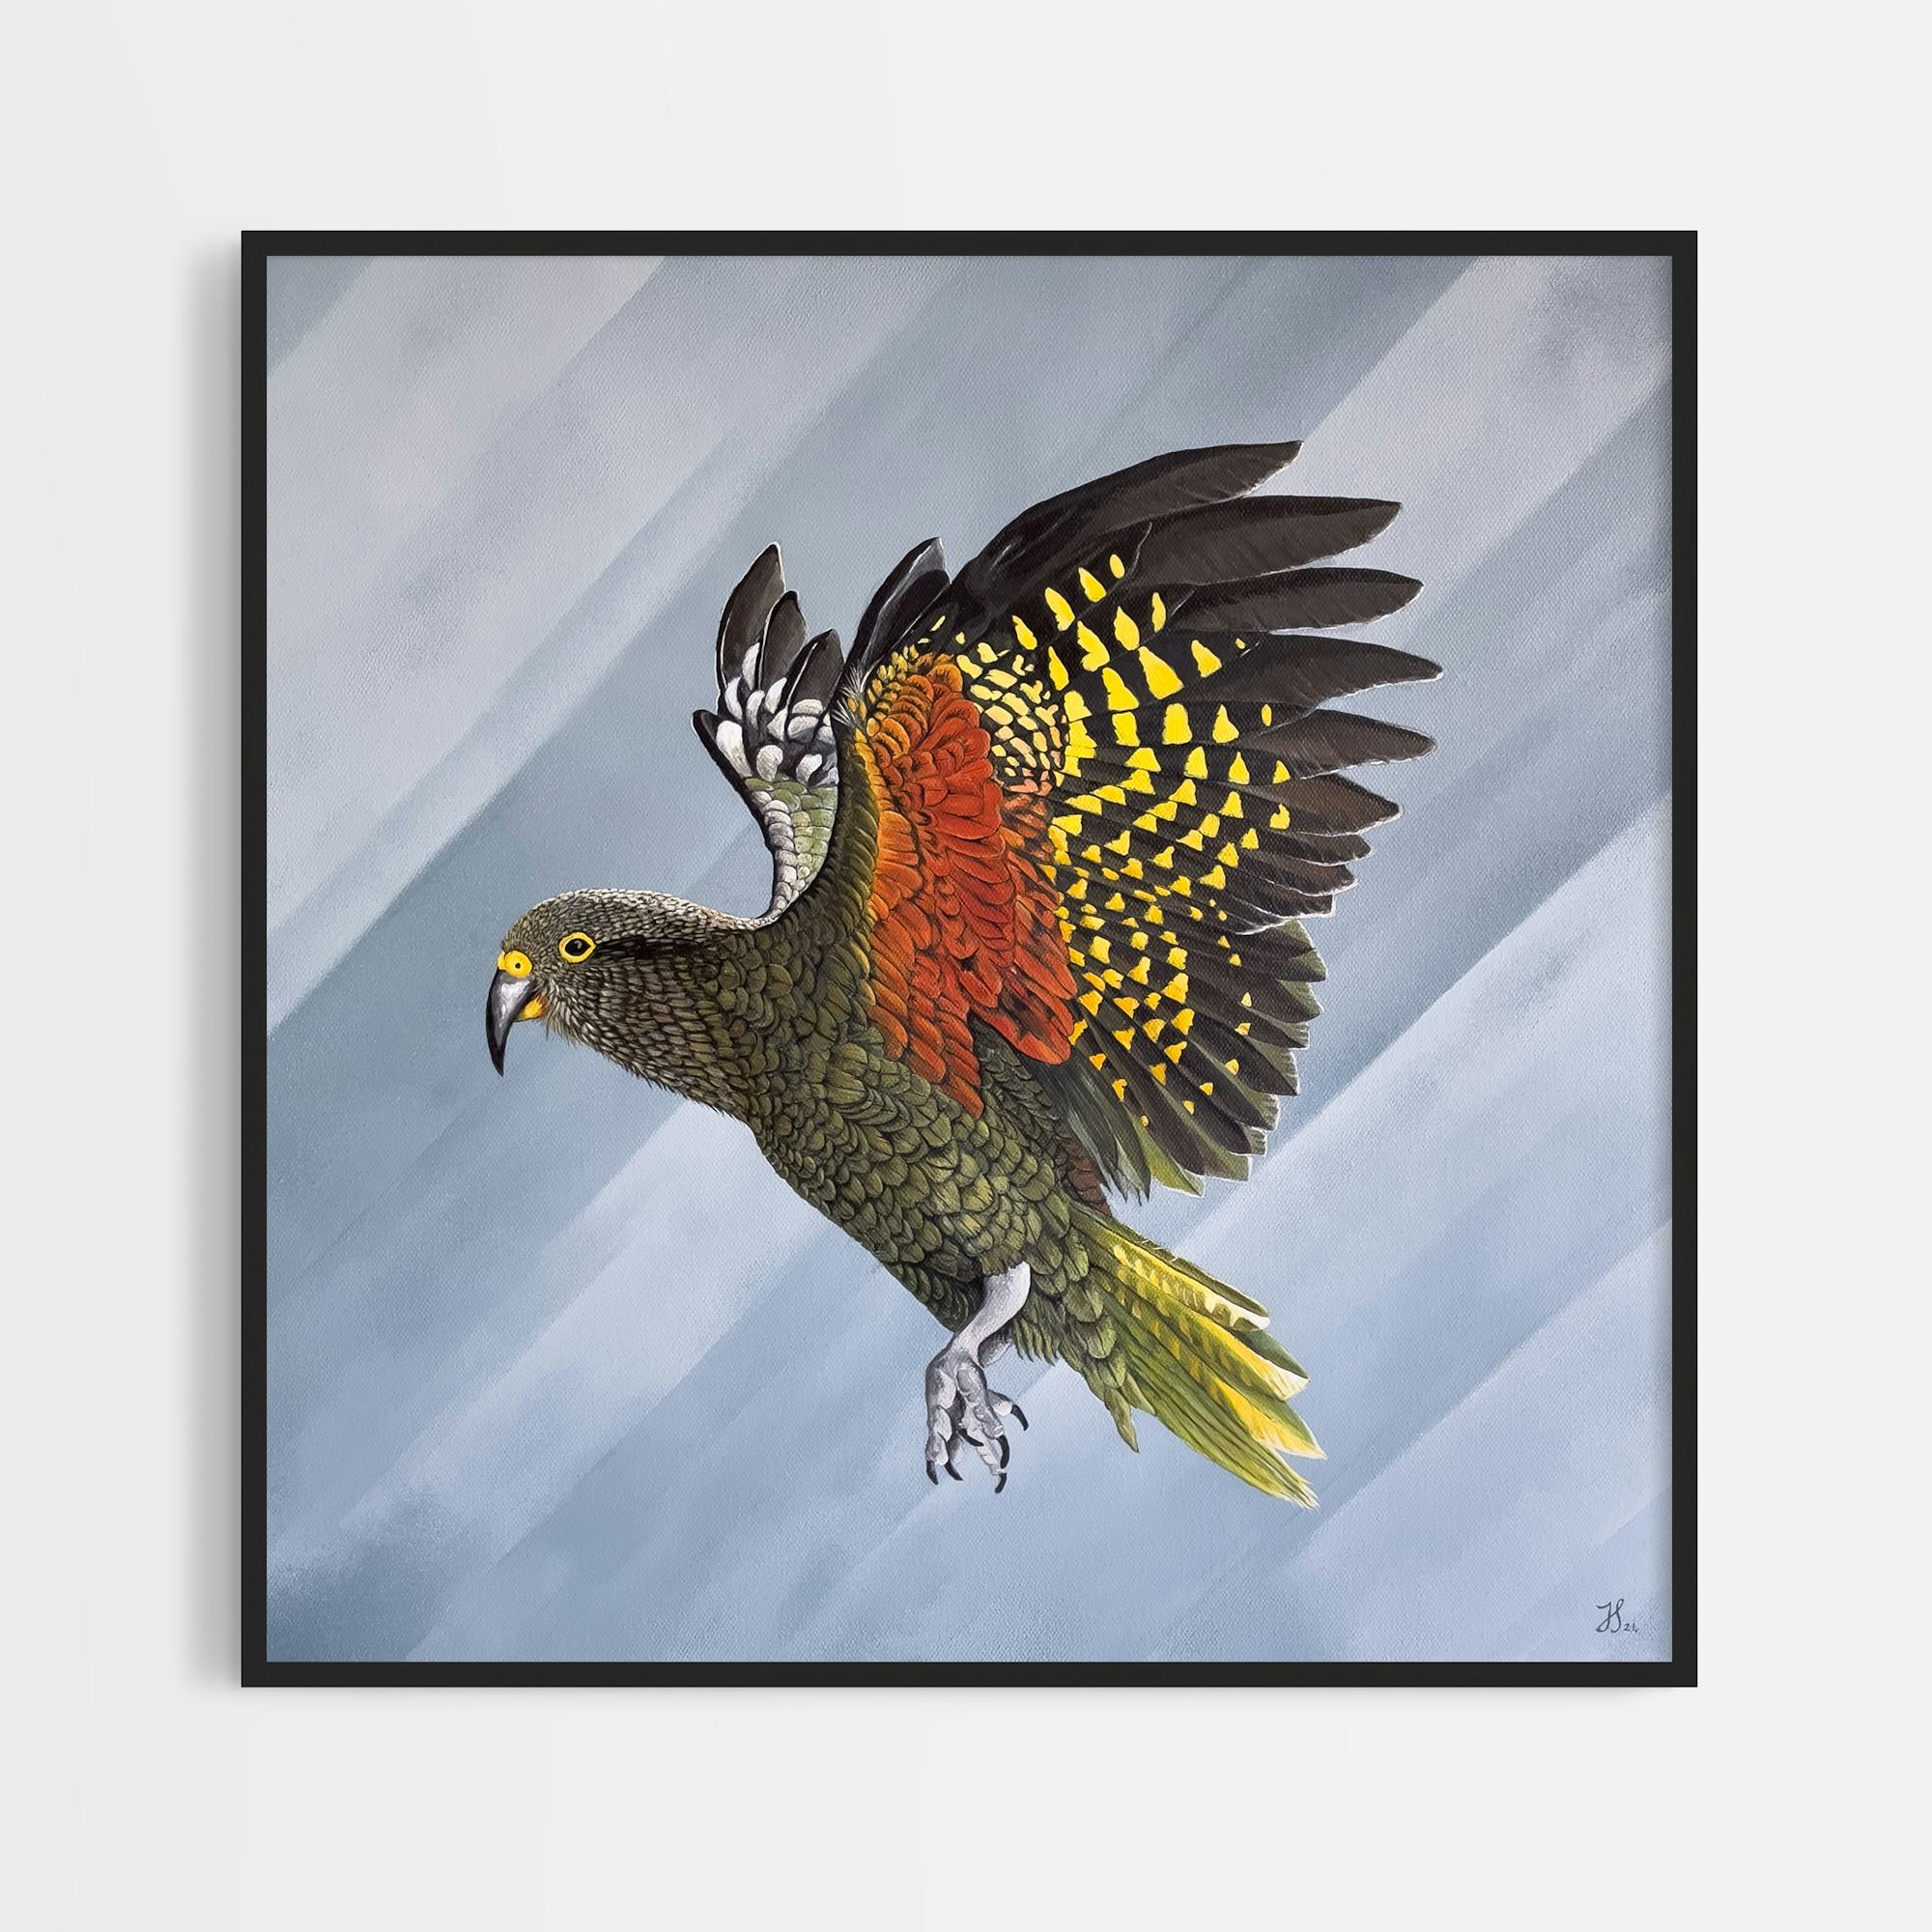 Framed painting of a NZ native Kea bird spreading its colourful wings.